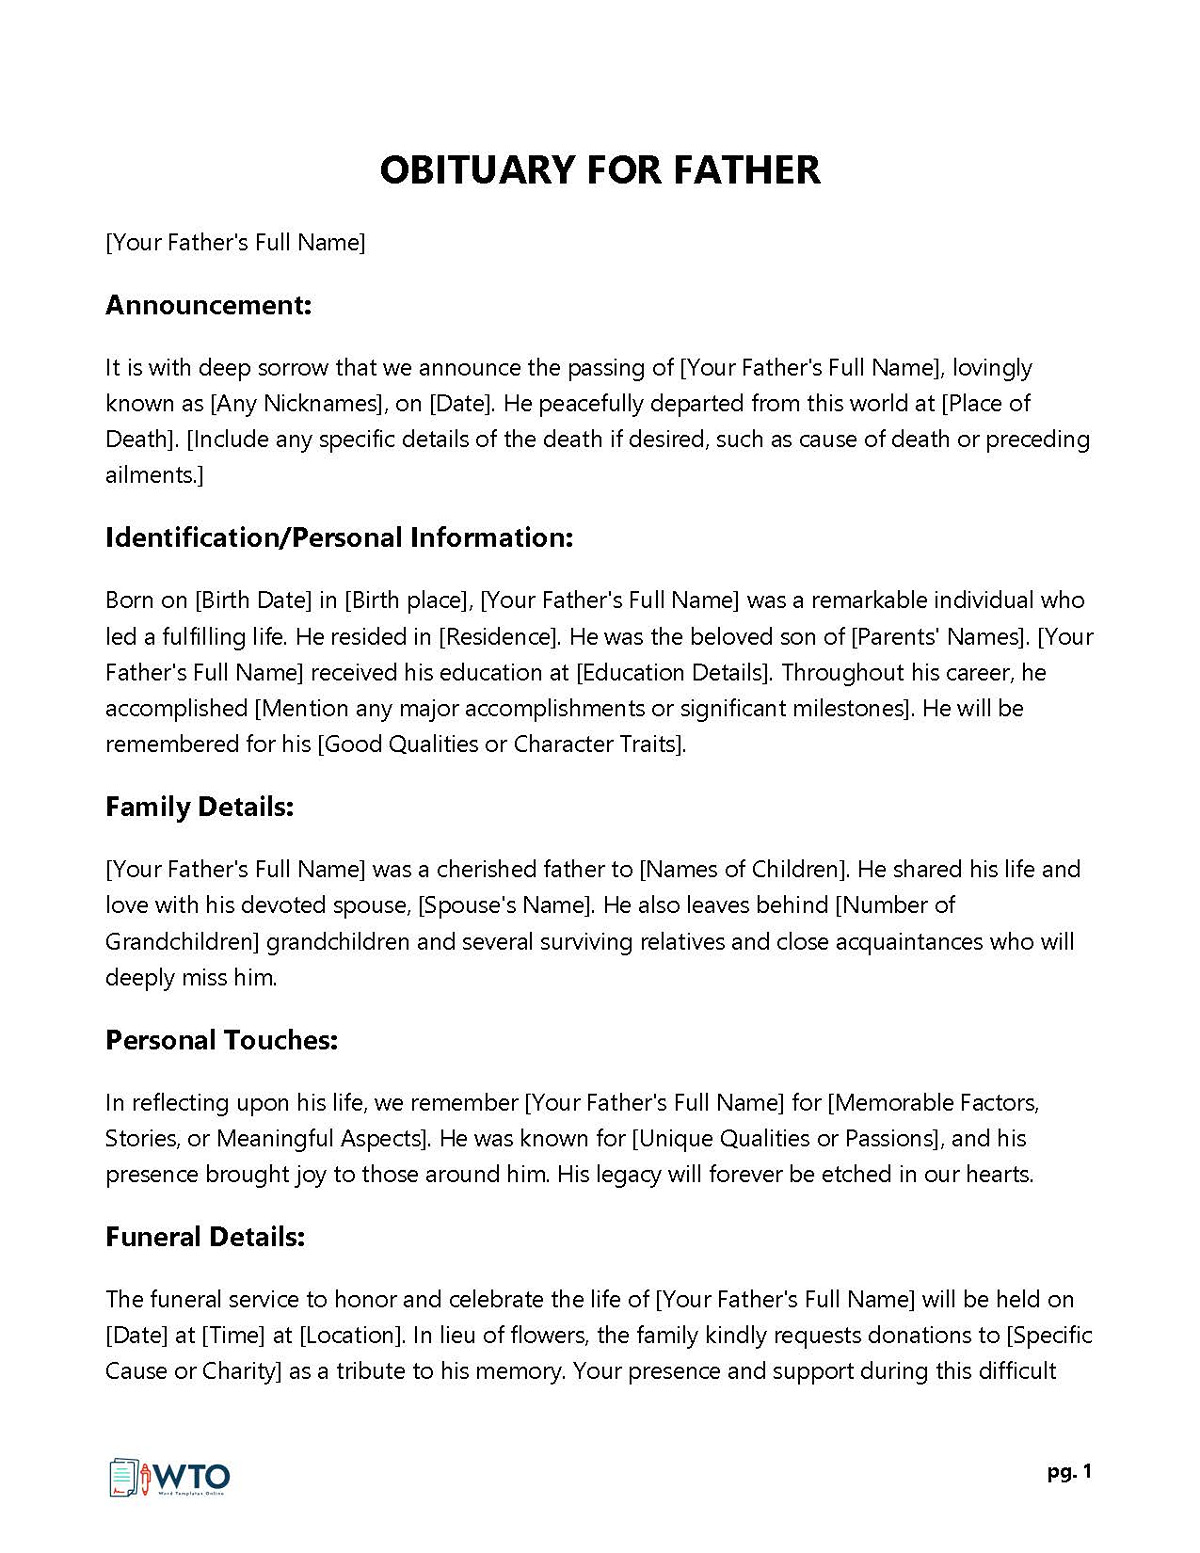 Free Obituary for Father Template - Editable Format